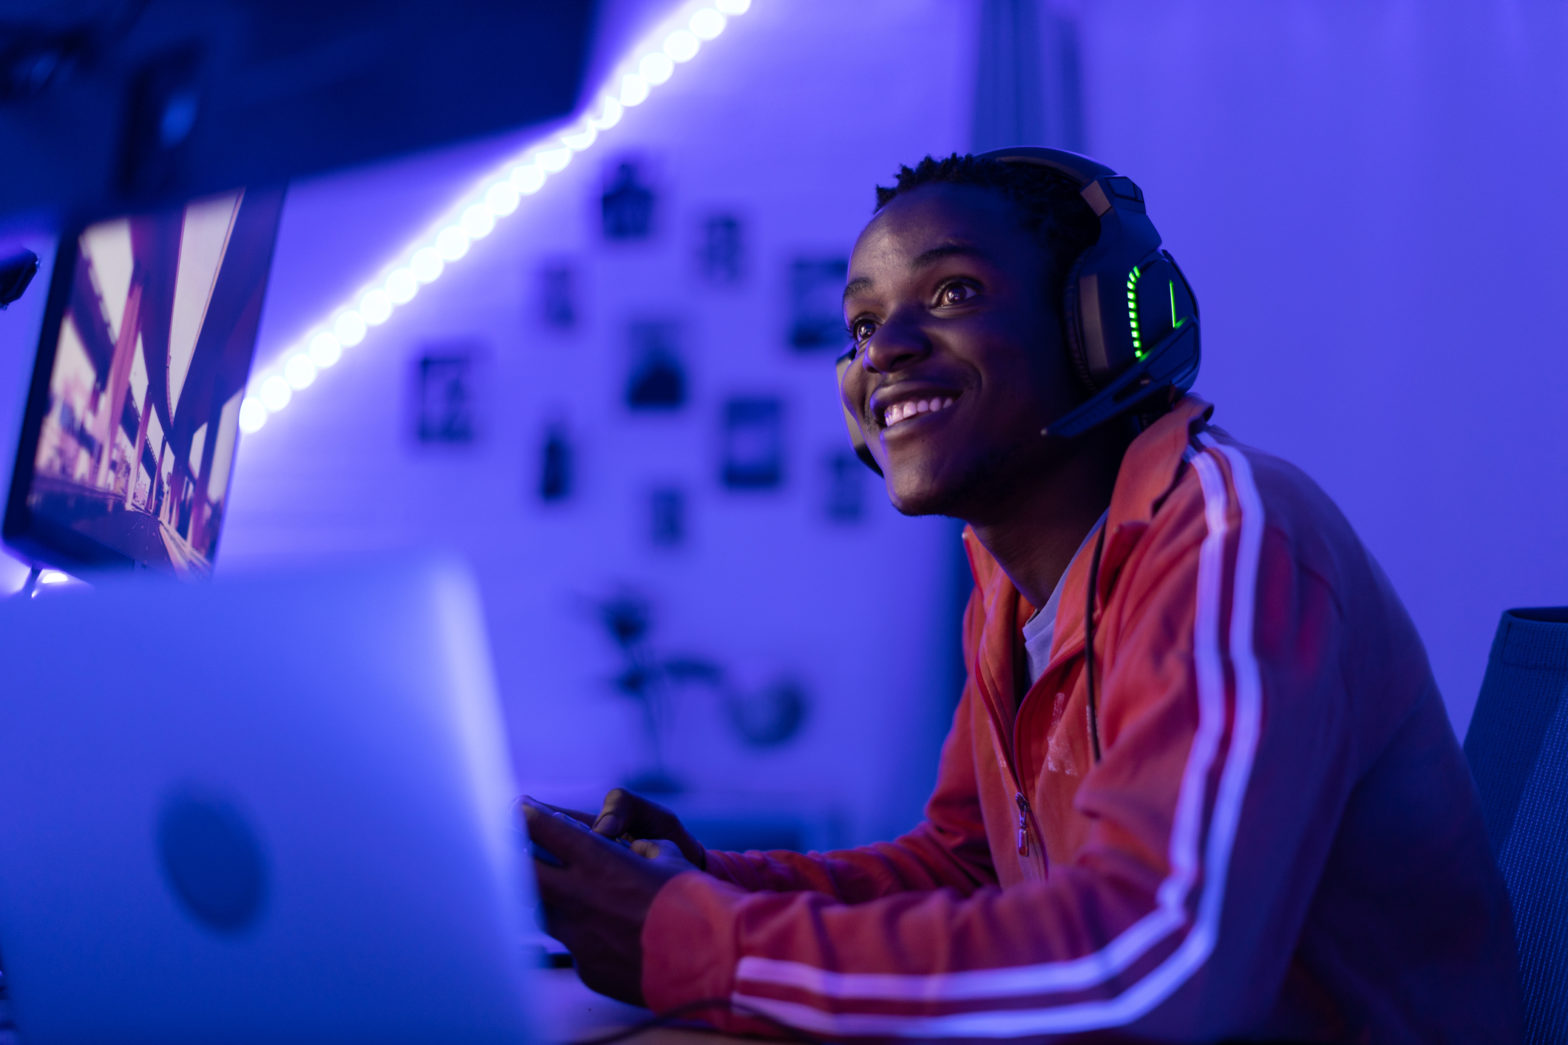 The Gaming Industry's On Track To Reaching A $222B Value Thanks Partly To Gen Z